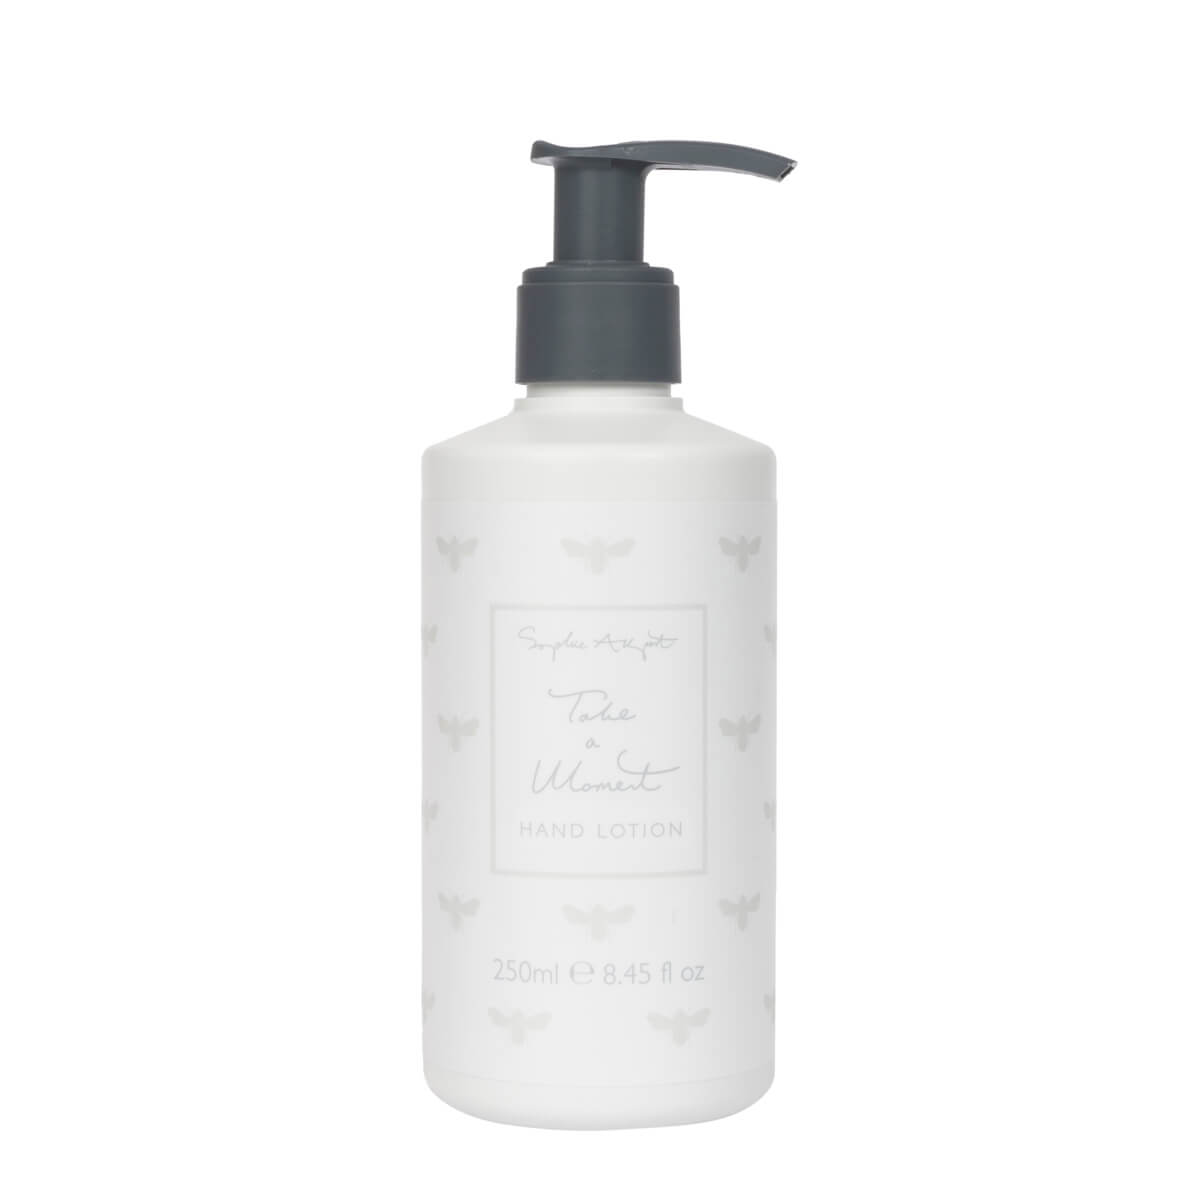 Take a Moment Luxury Hand Lotion